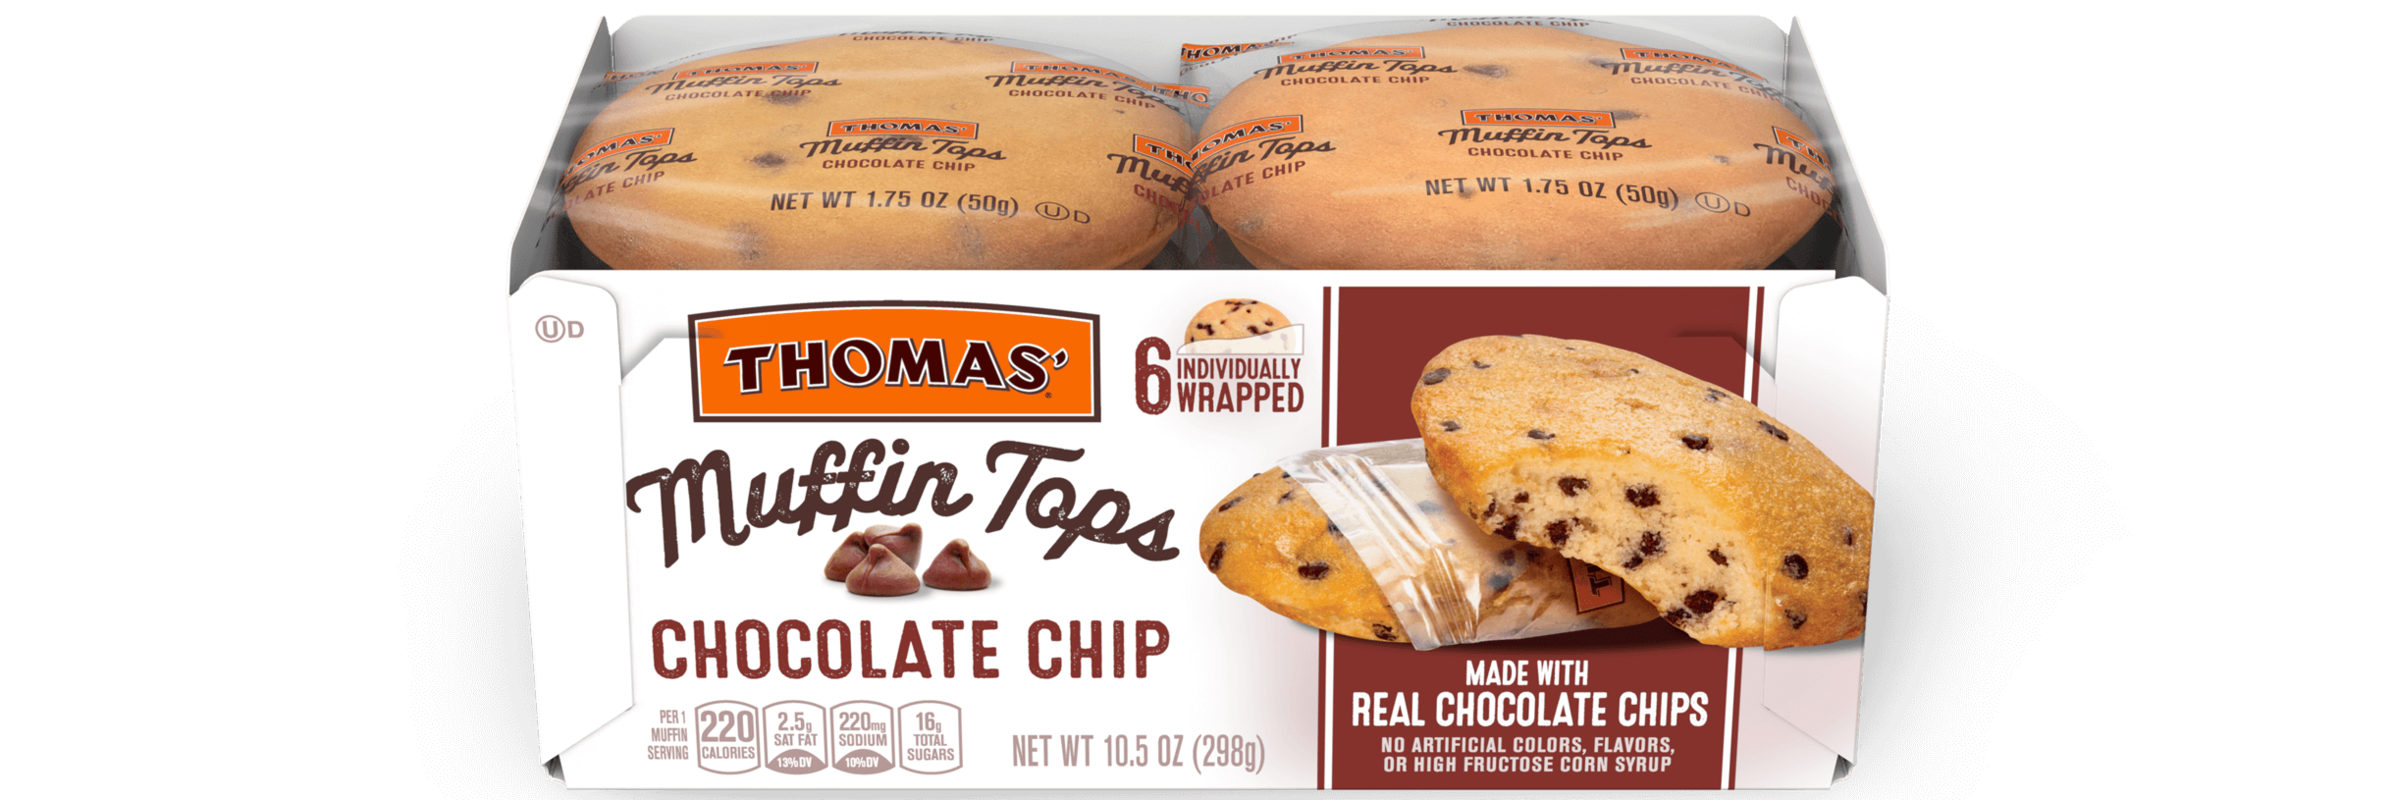 Thomas Is Cutting Off the Top of Muffins with New Muffin Tops - Thrillist